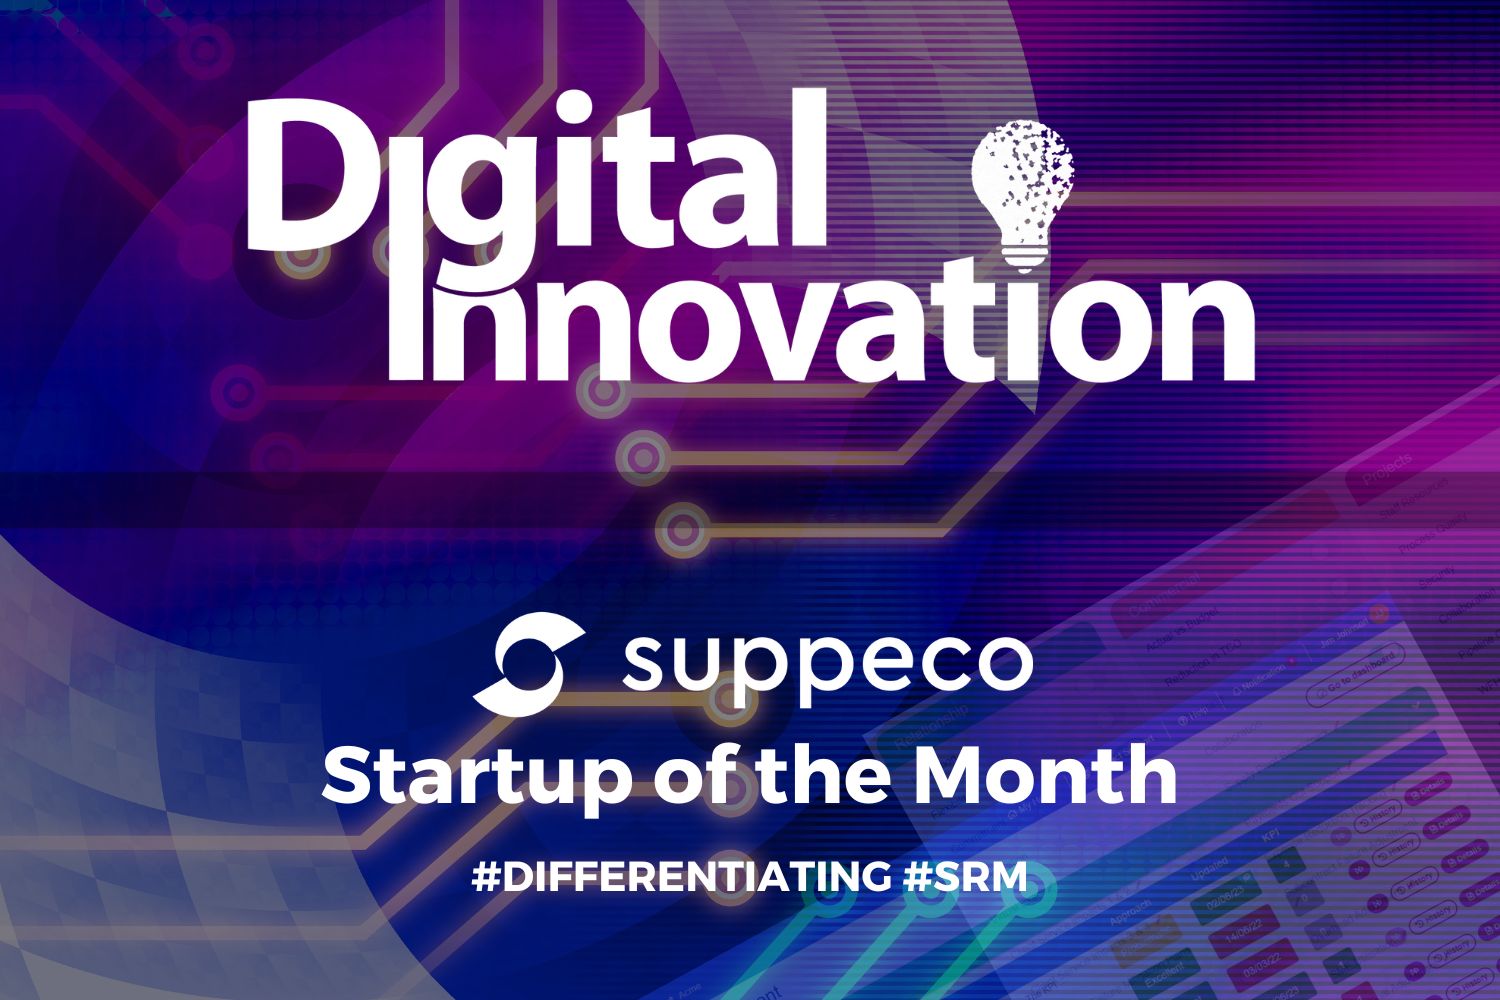 digital innovation, suppeco, startup of the month, differentiating, SRM